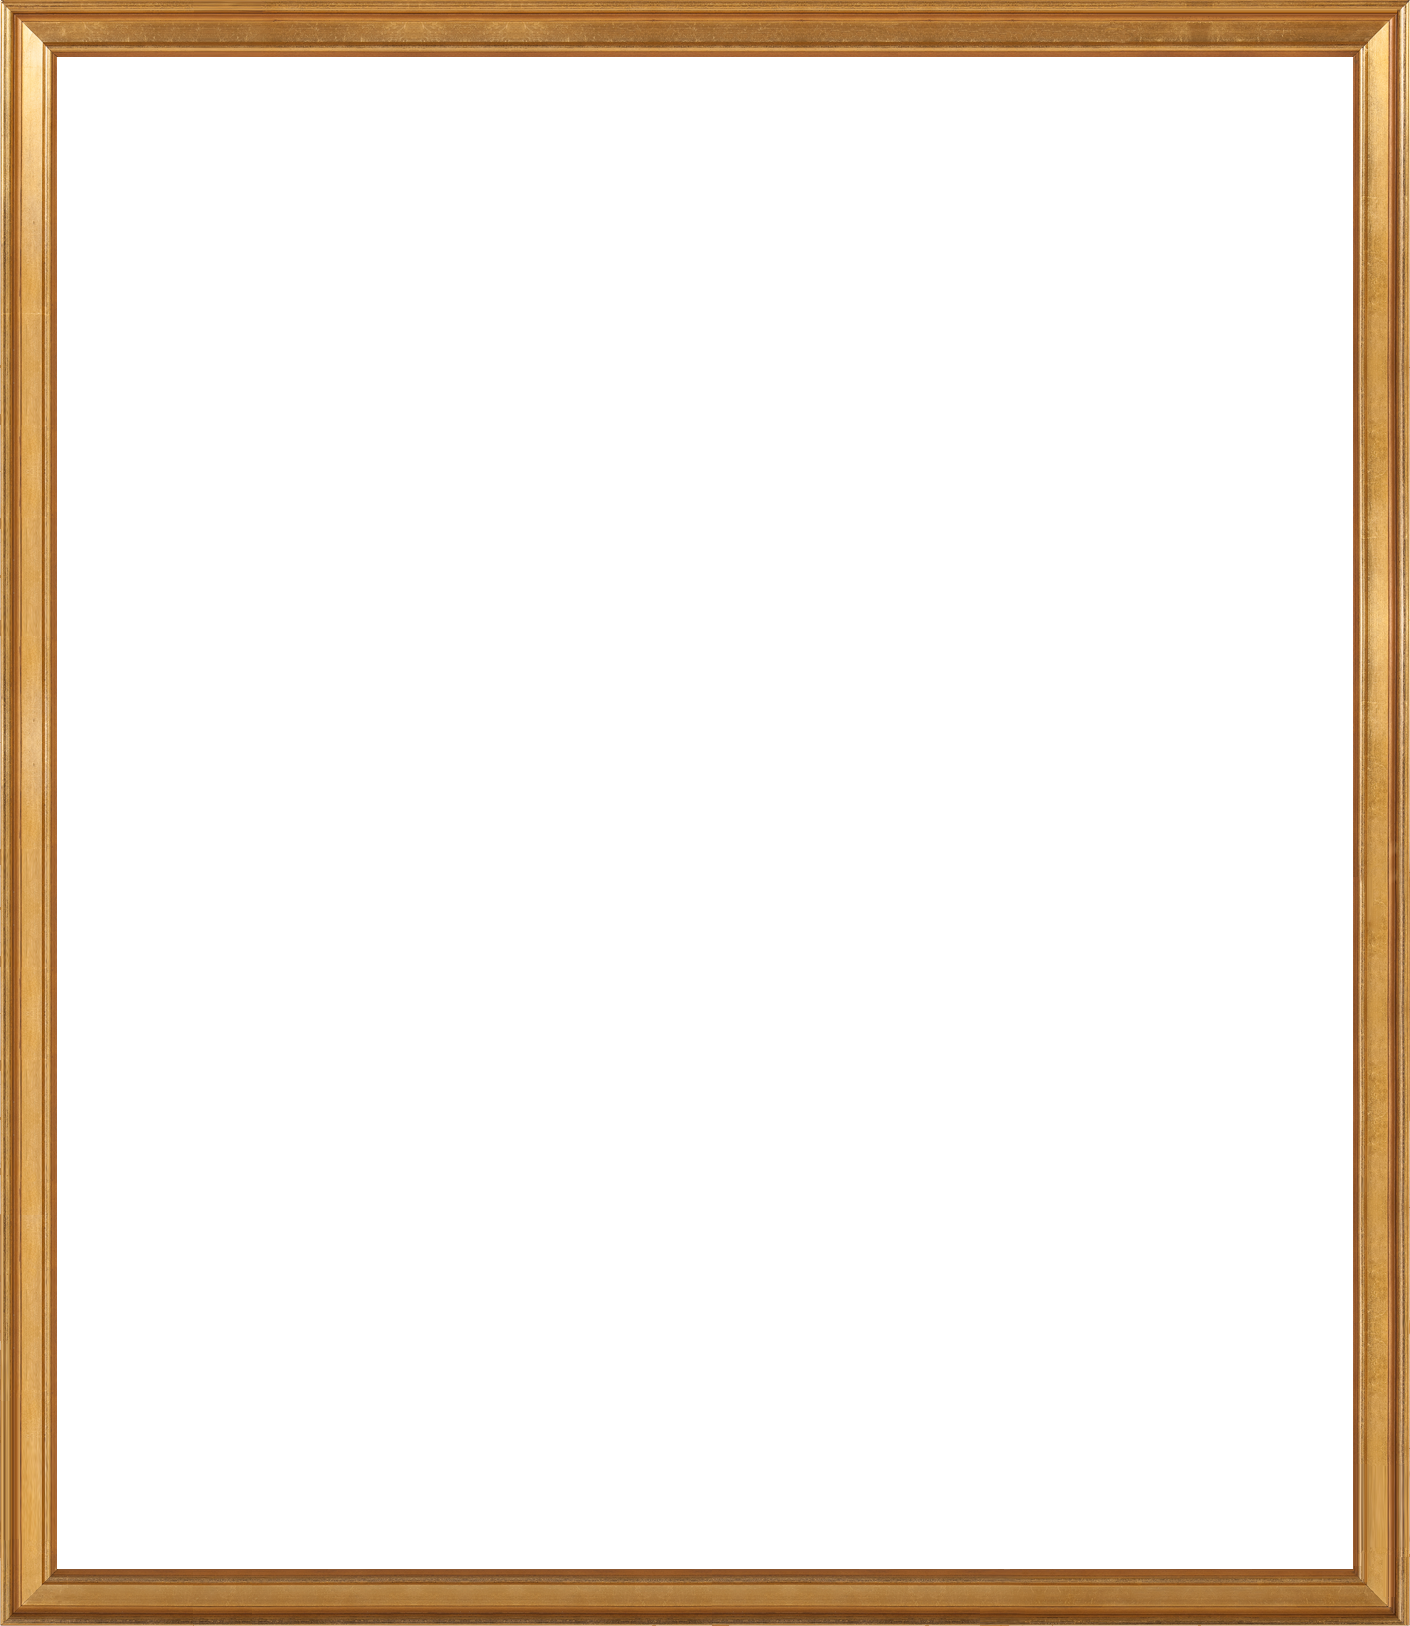 Free Gold Frame Border Png, Download Free Gold Frame Border Png png image, Free ClipArts on Clipart Library